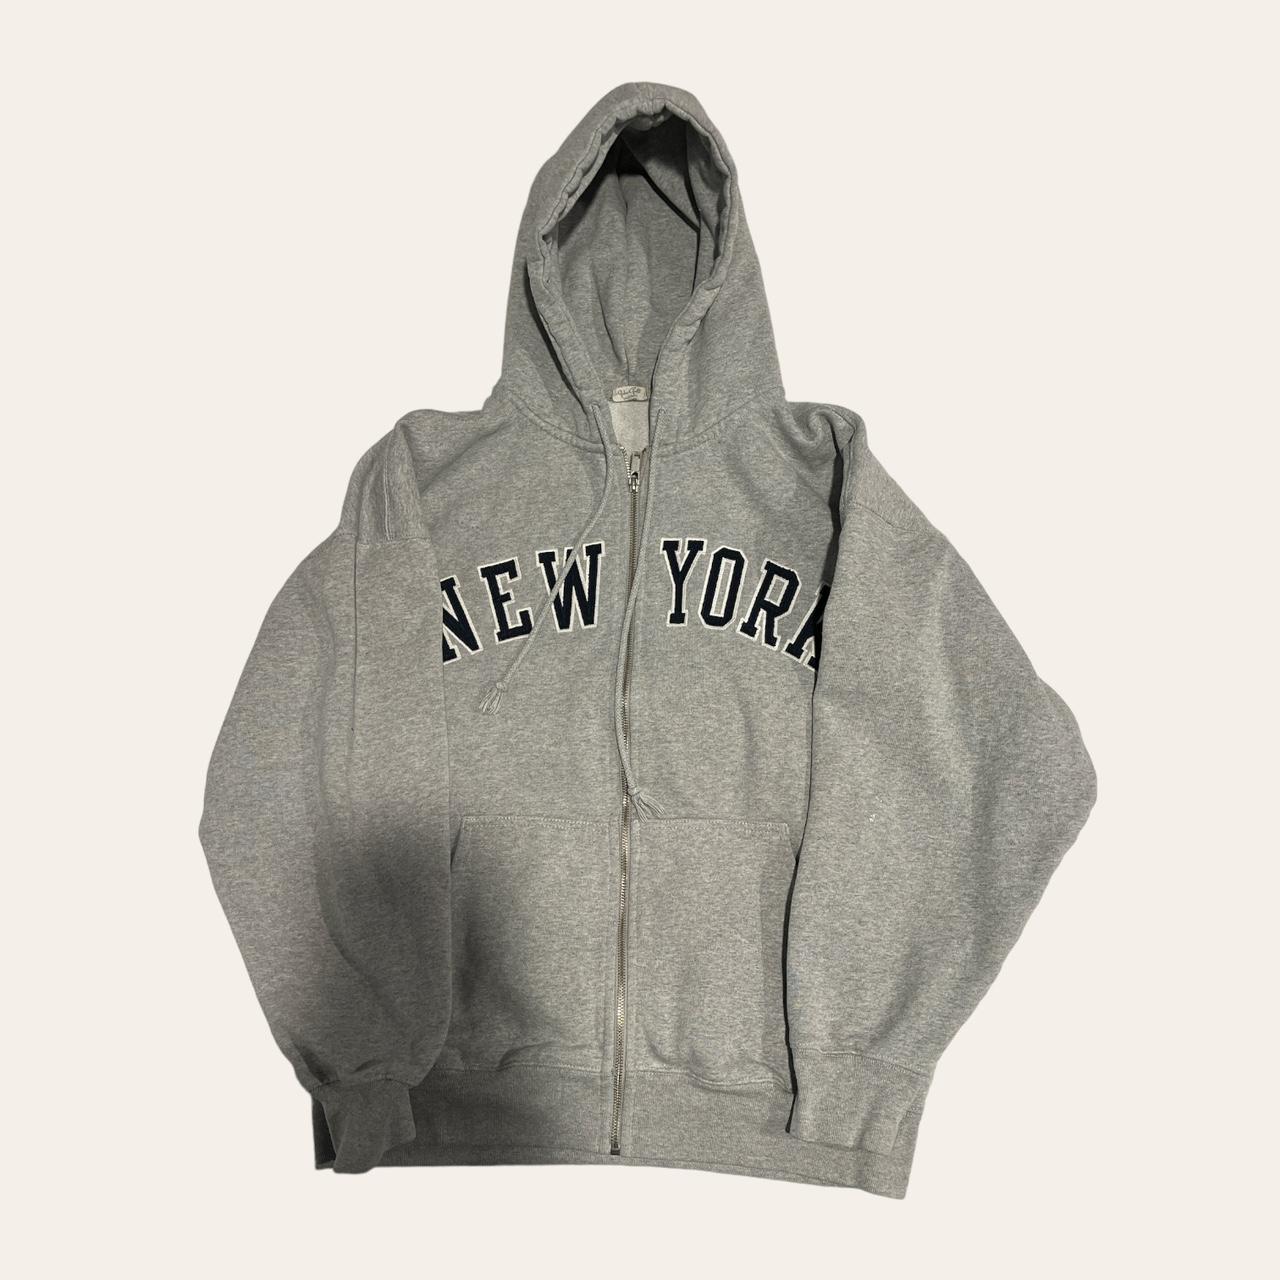 Dupe for Brandy Melville Christy Hoodie? : r/findfashion